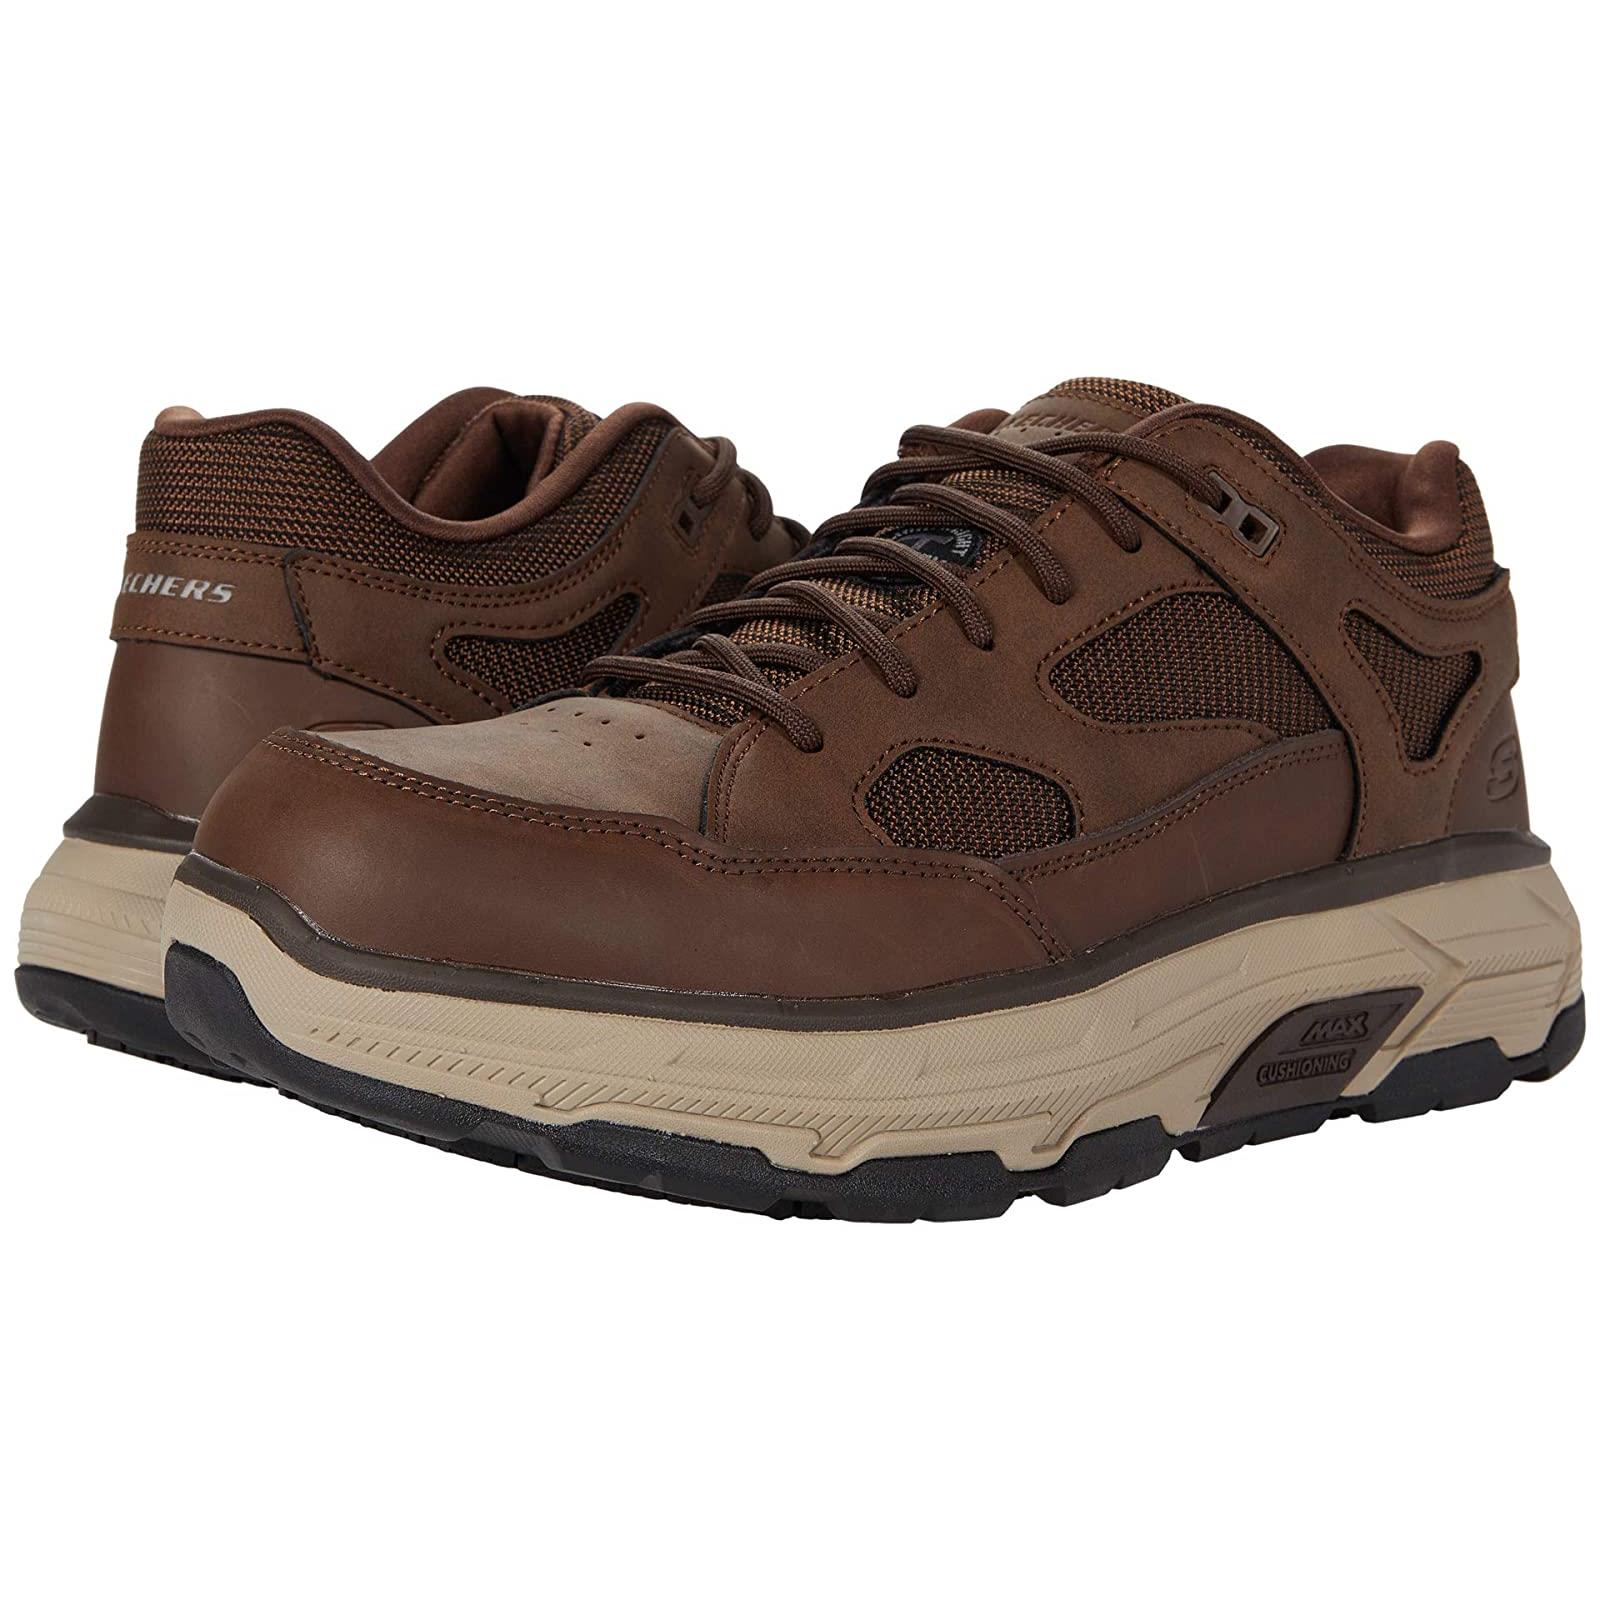 Man`s Sneakers Athletic Shoes Skechers Work Max Stout ST Alloy Toe Brown